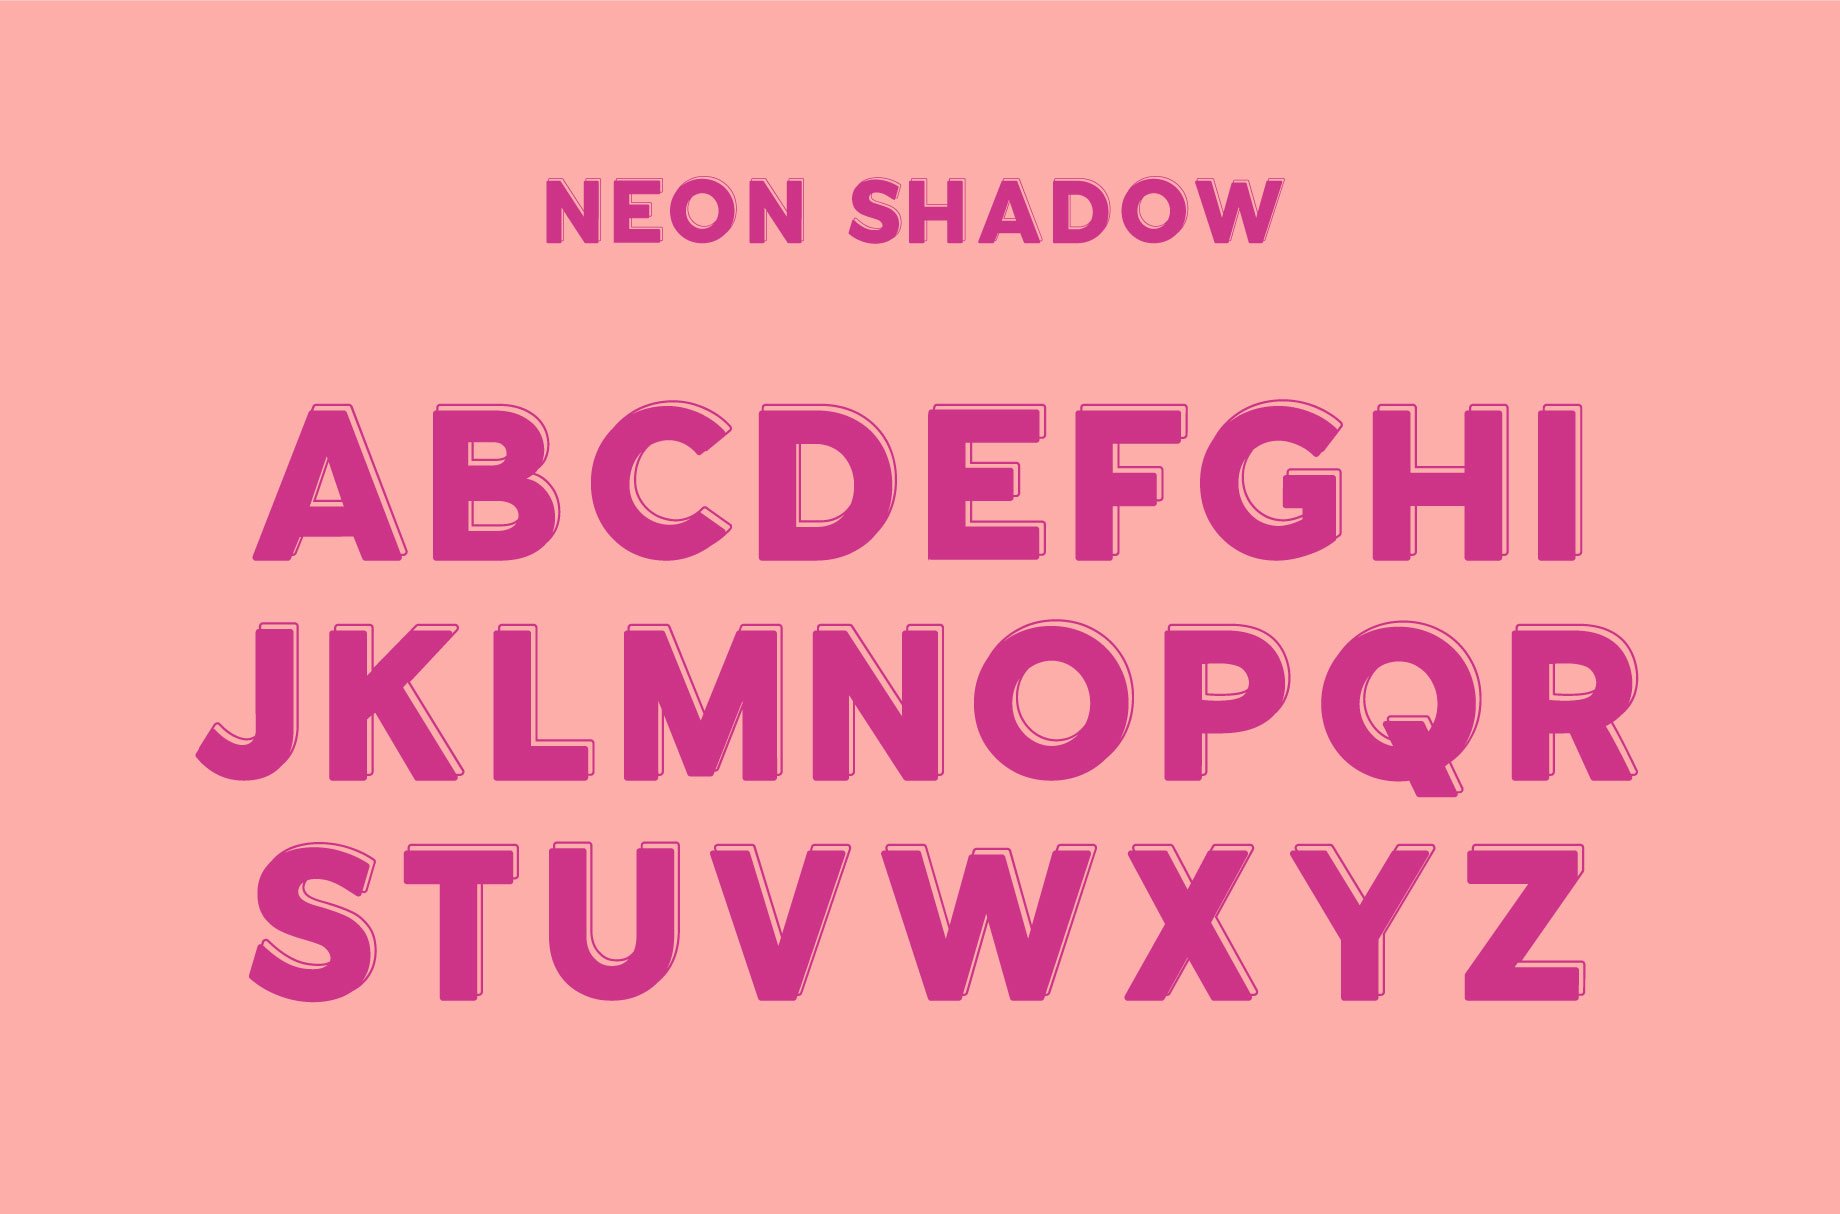 neon font by big cat creative 07 584